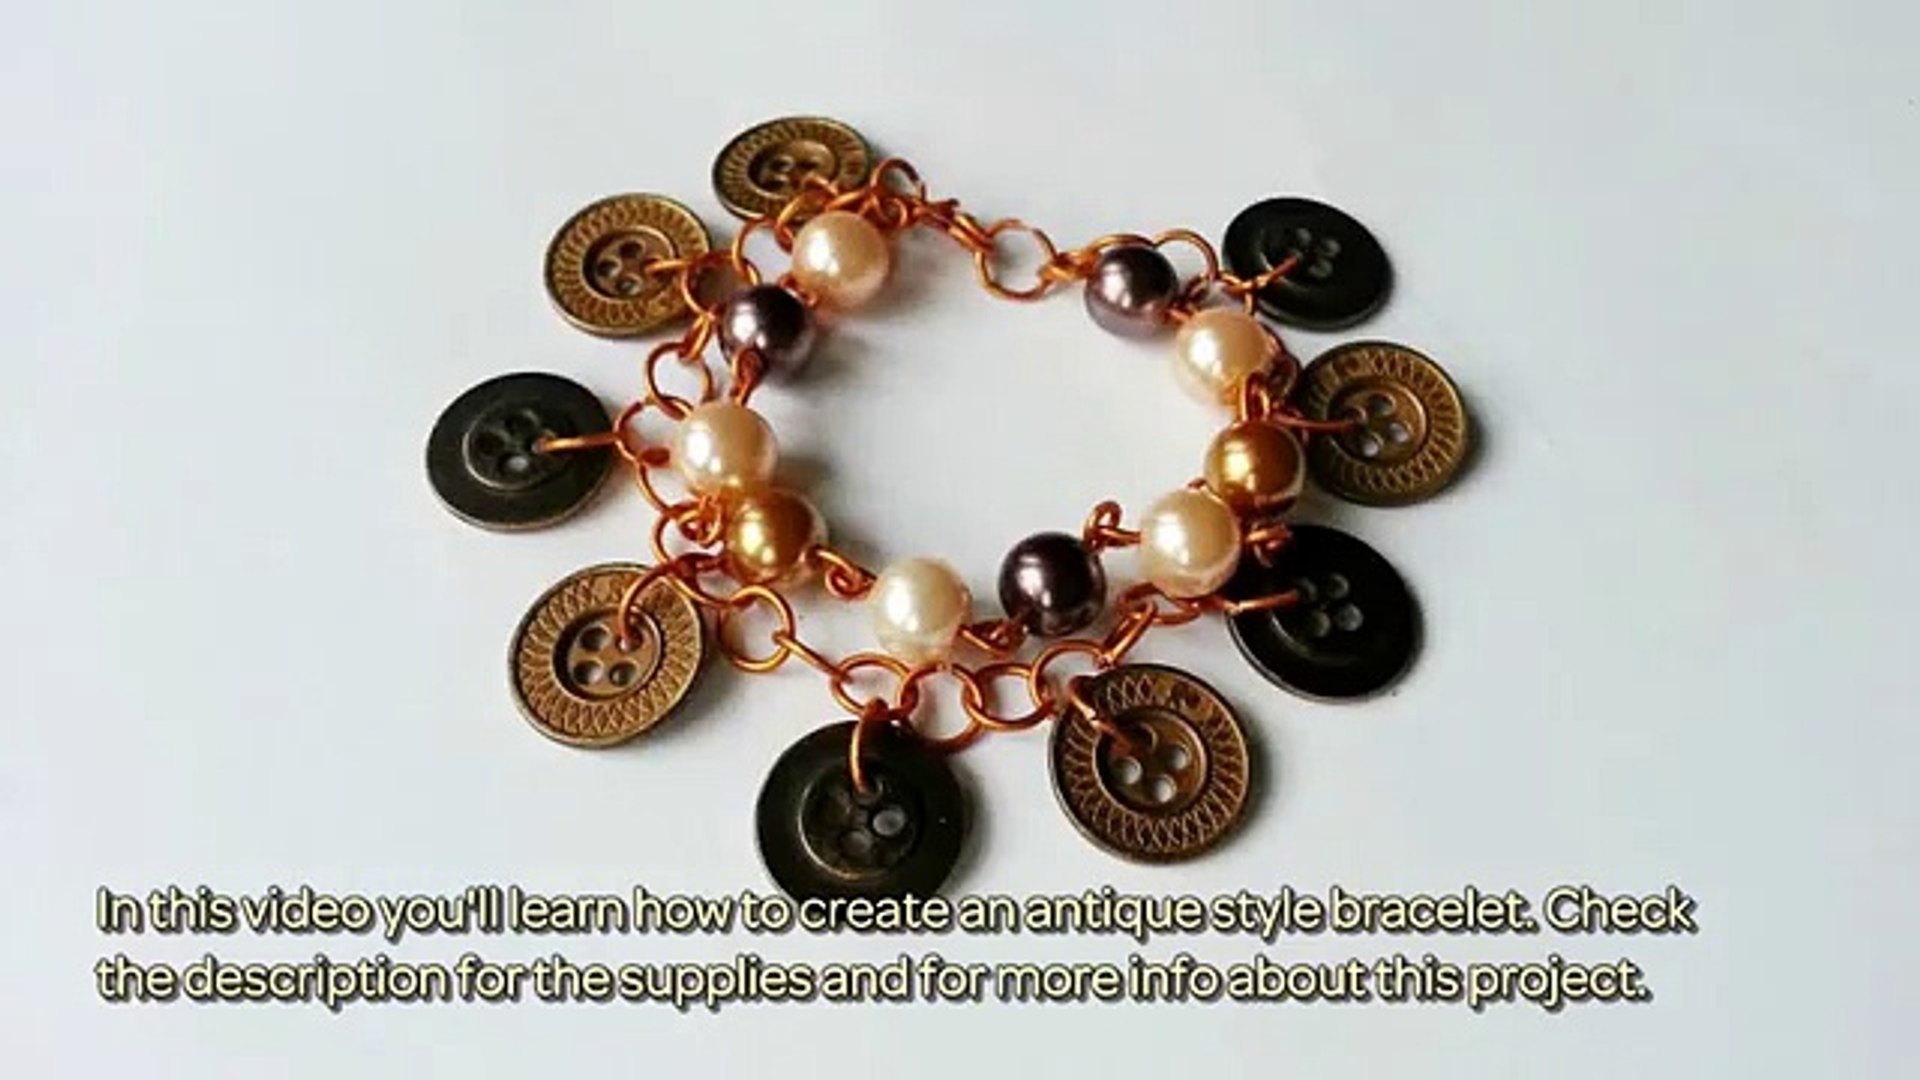 How To Create An Antique Style Bracelet - DIY Style Tutorial - Guidecentral